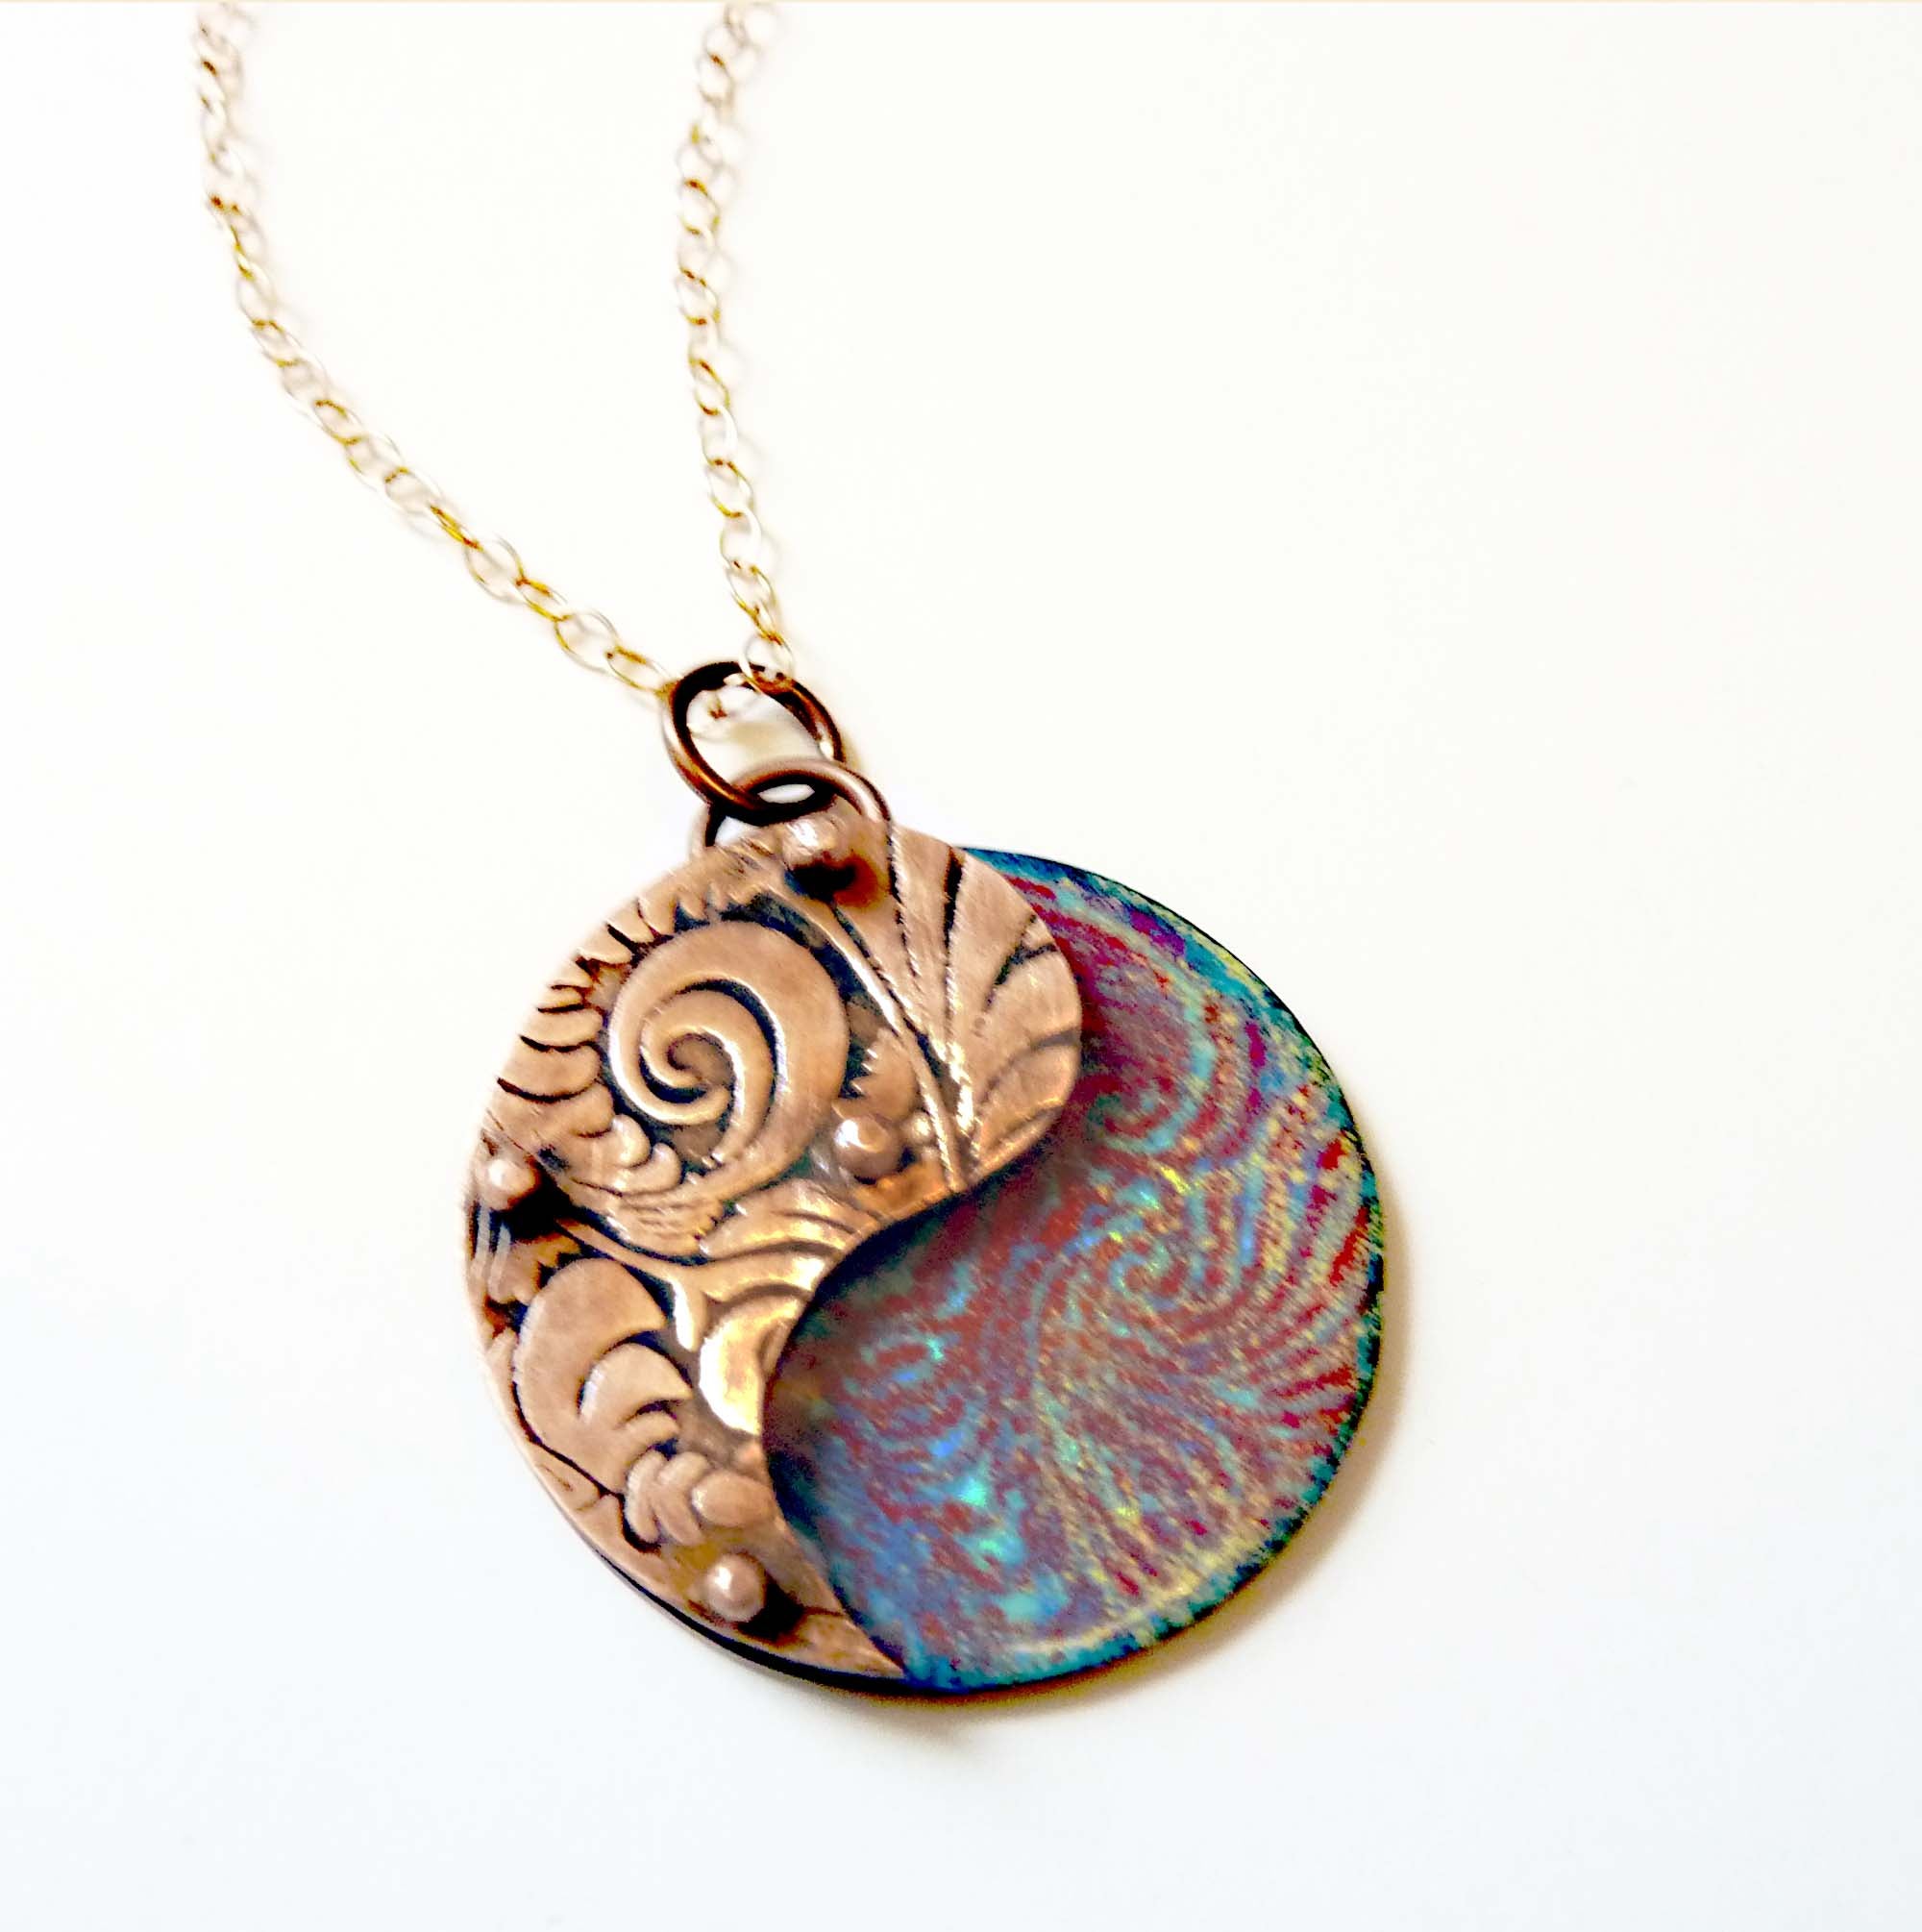 Yin Yang Enamel Necklace, Riveted Paisley, Copper Pendant, Artisan Jewelry, Mixed Media, 3D Layered, Hand Enameled Jewelry, Boho 14K Rose Gold Filled